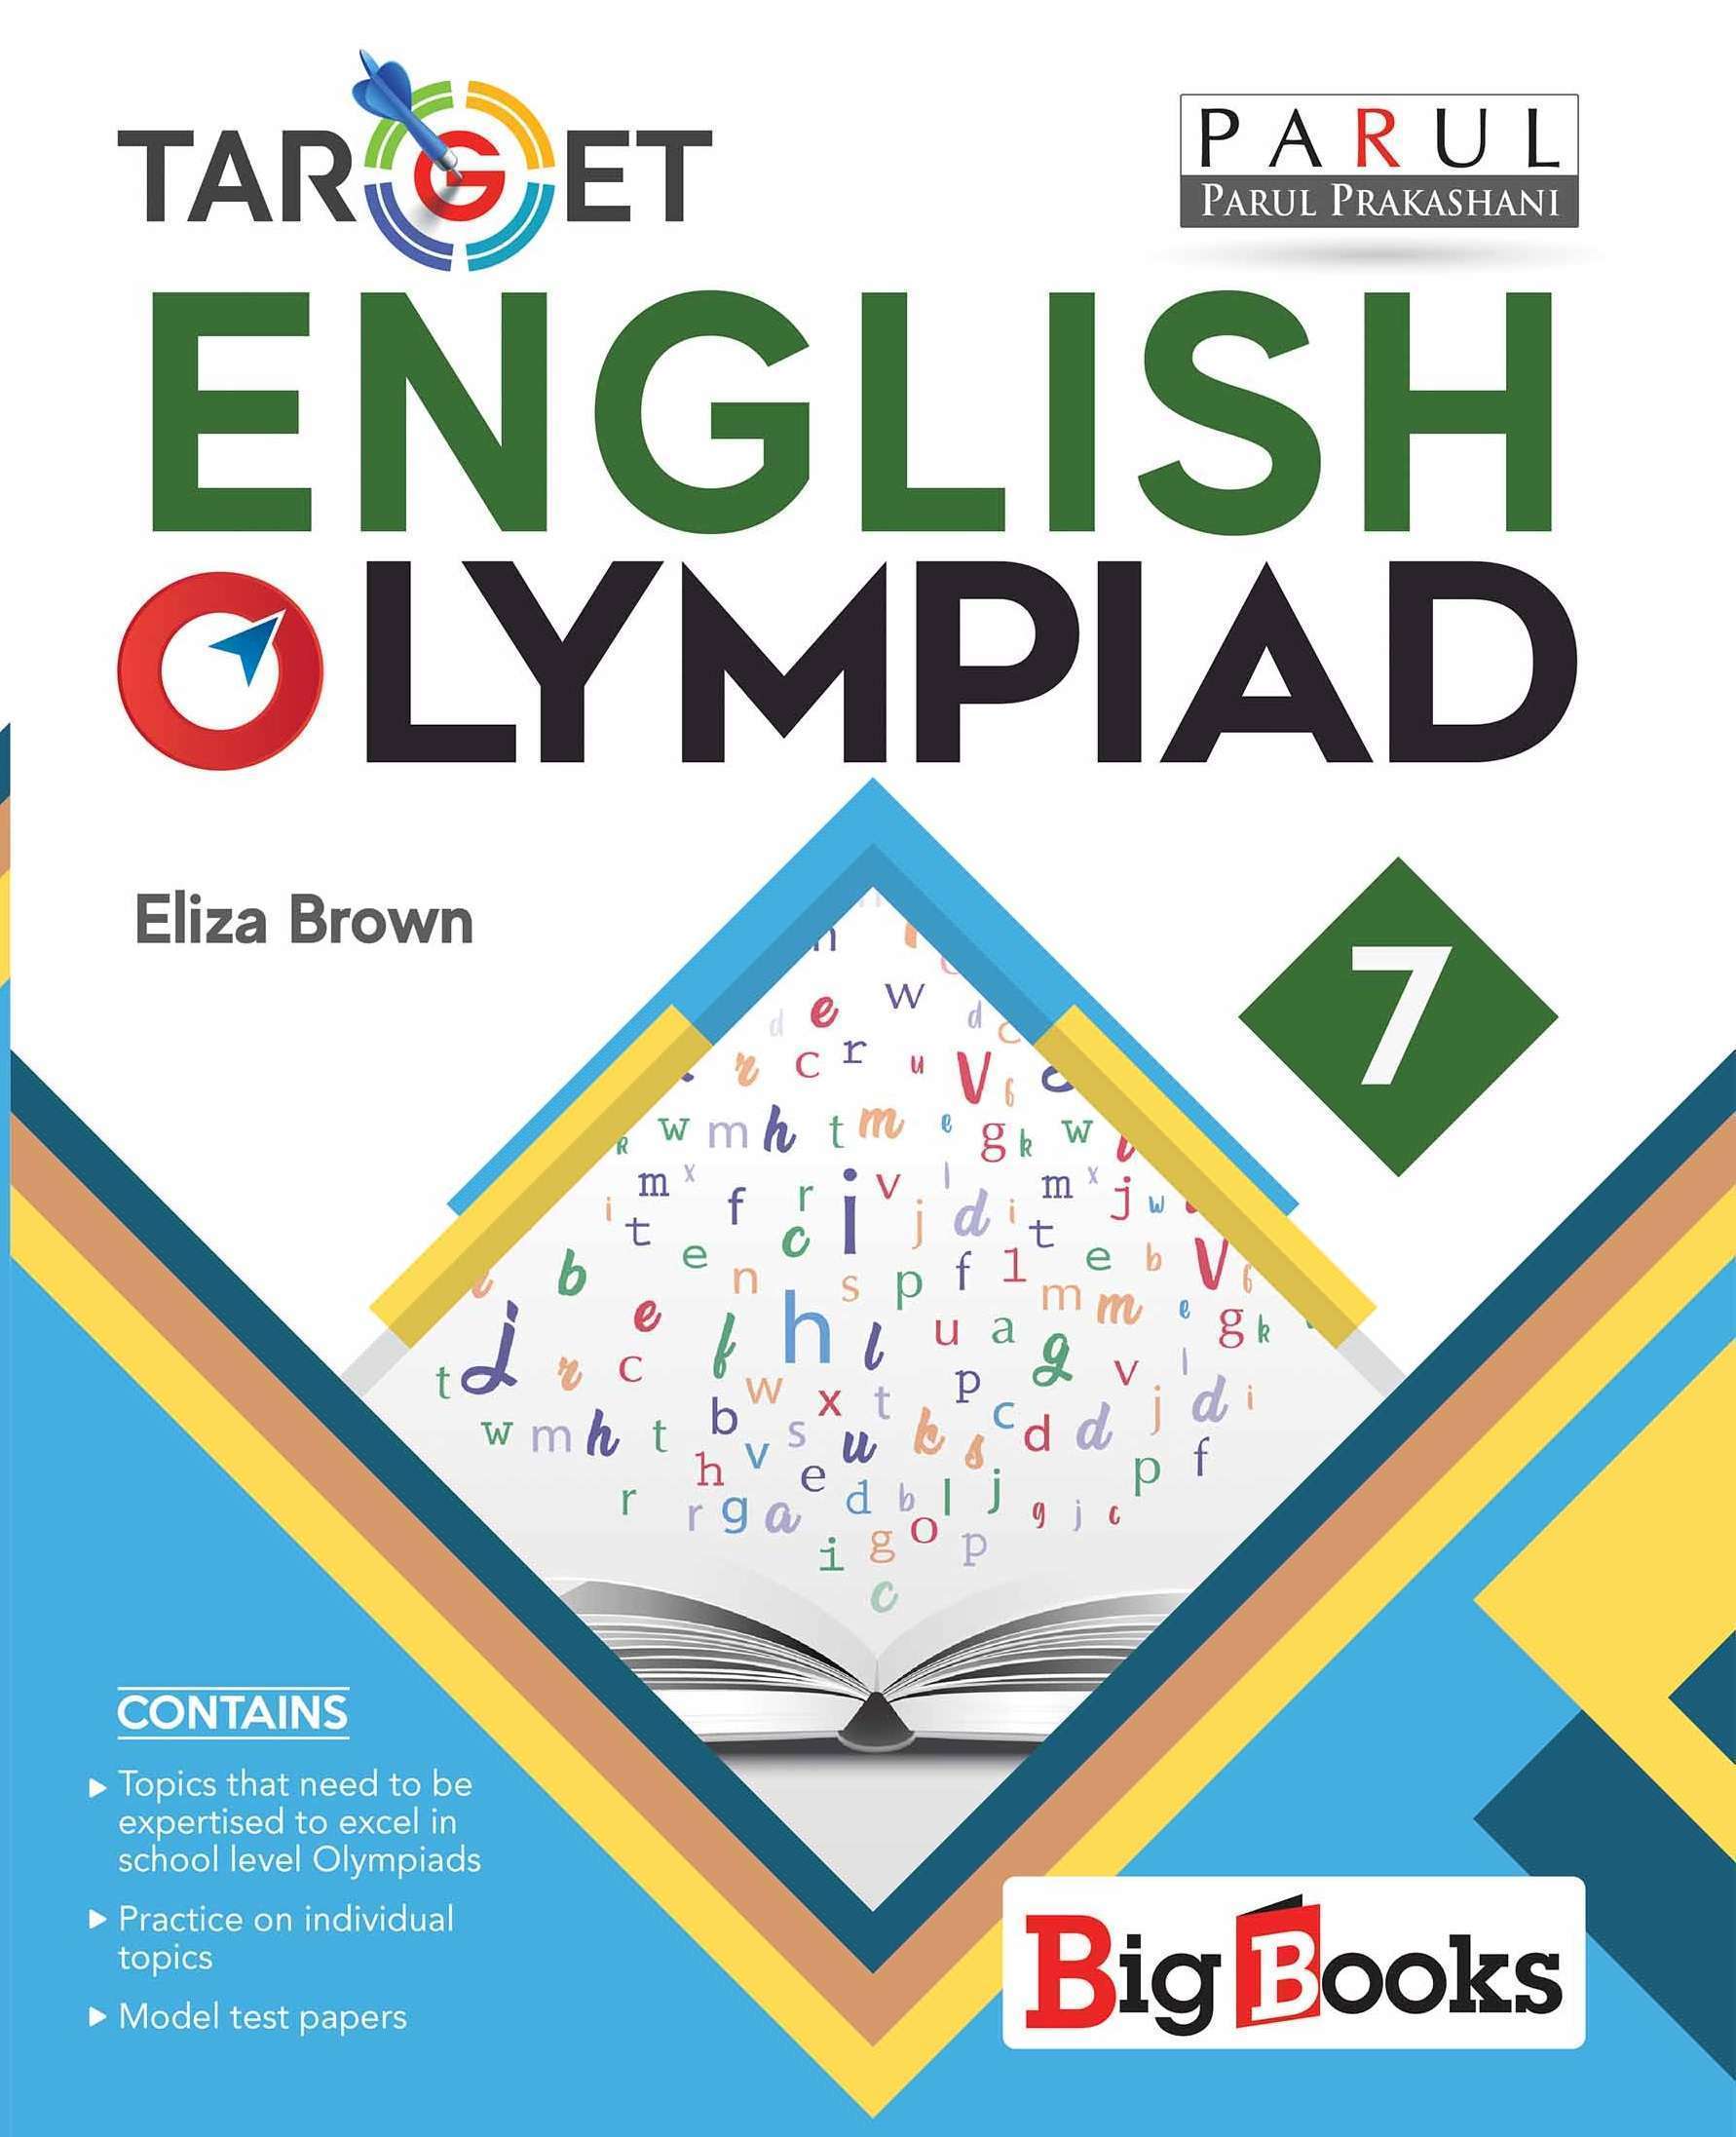 Buy English Olympiad book for 7